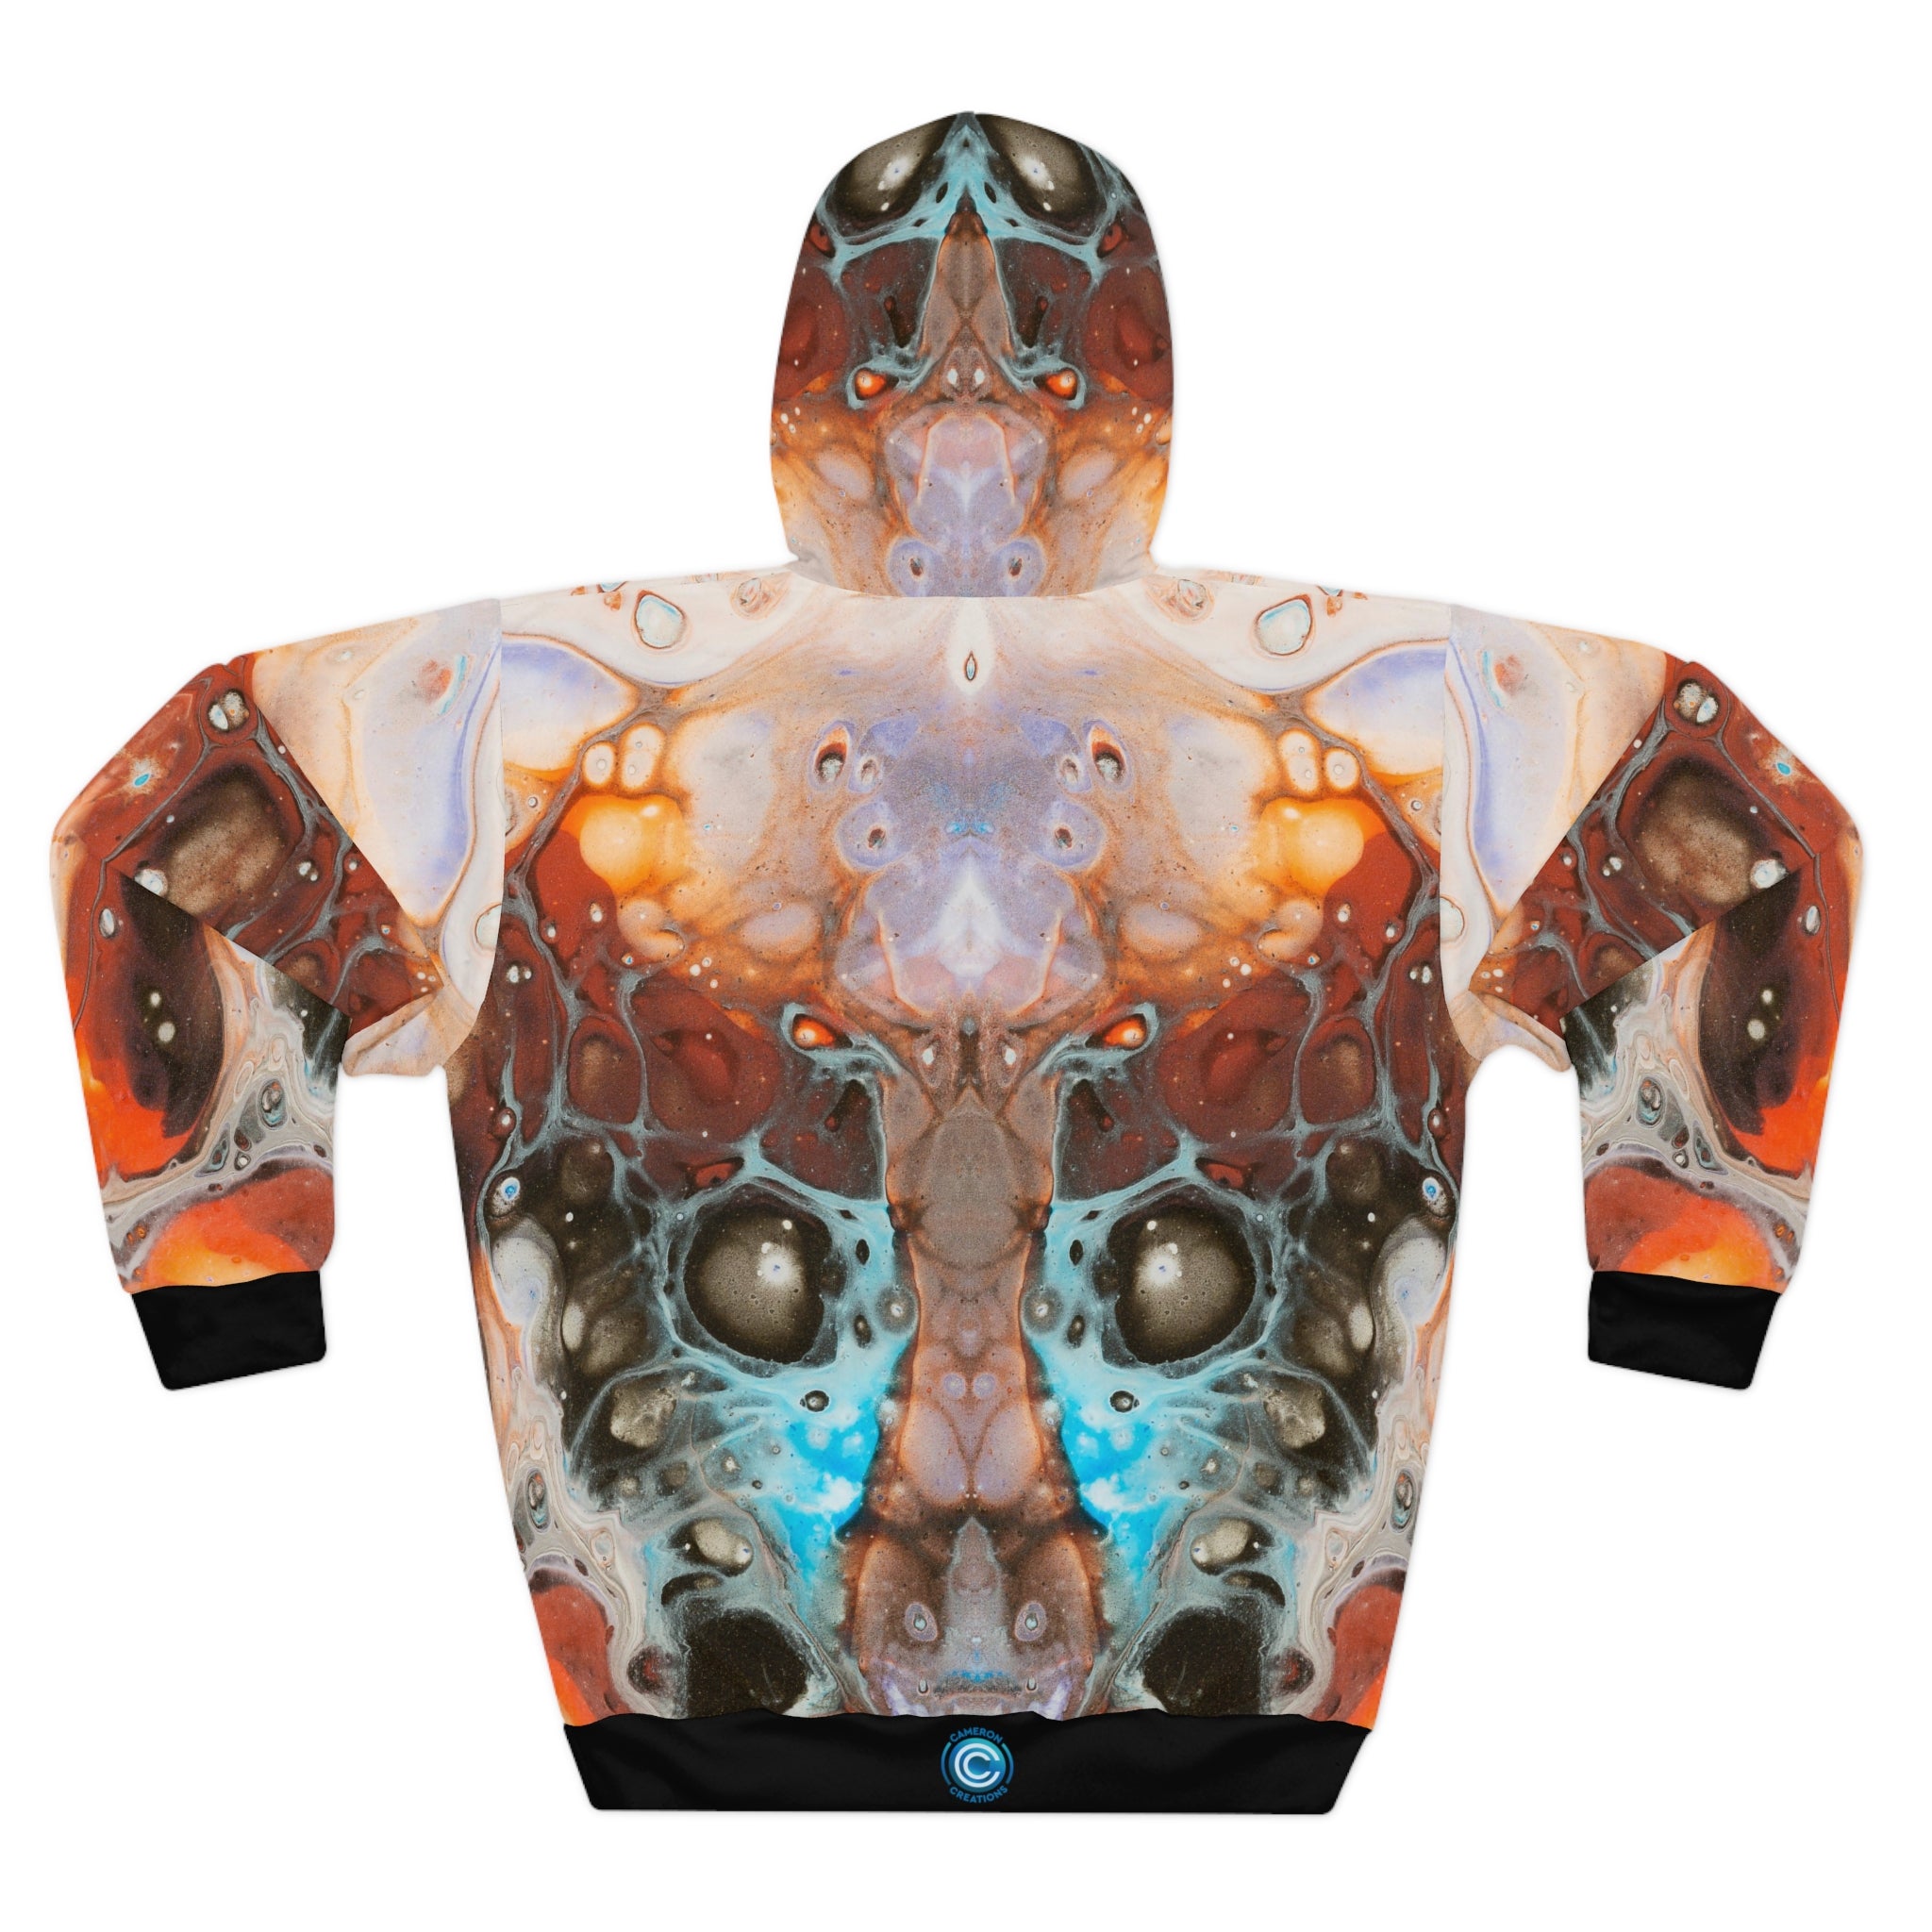 Cameron Creations - Galactic Mask - Pullover Hoodie - Bacl